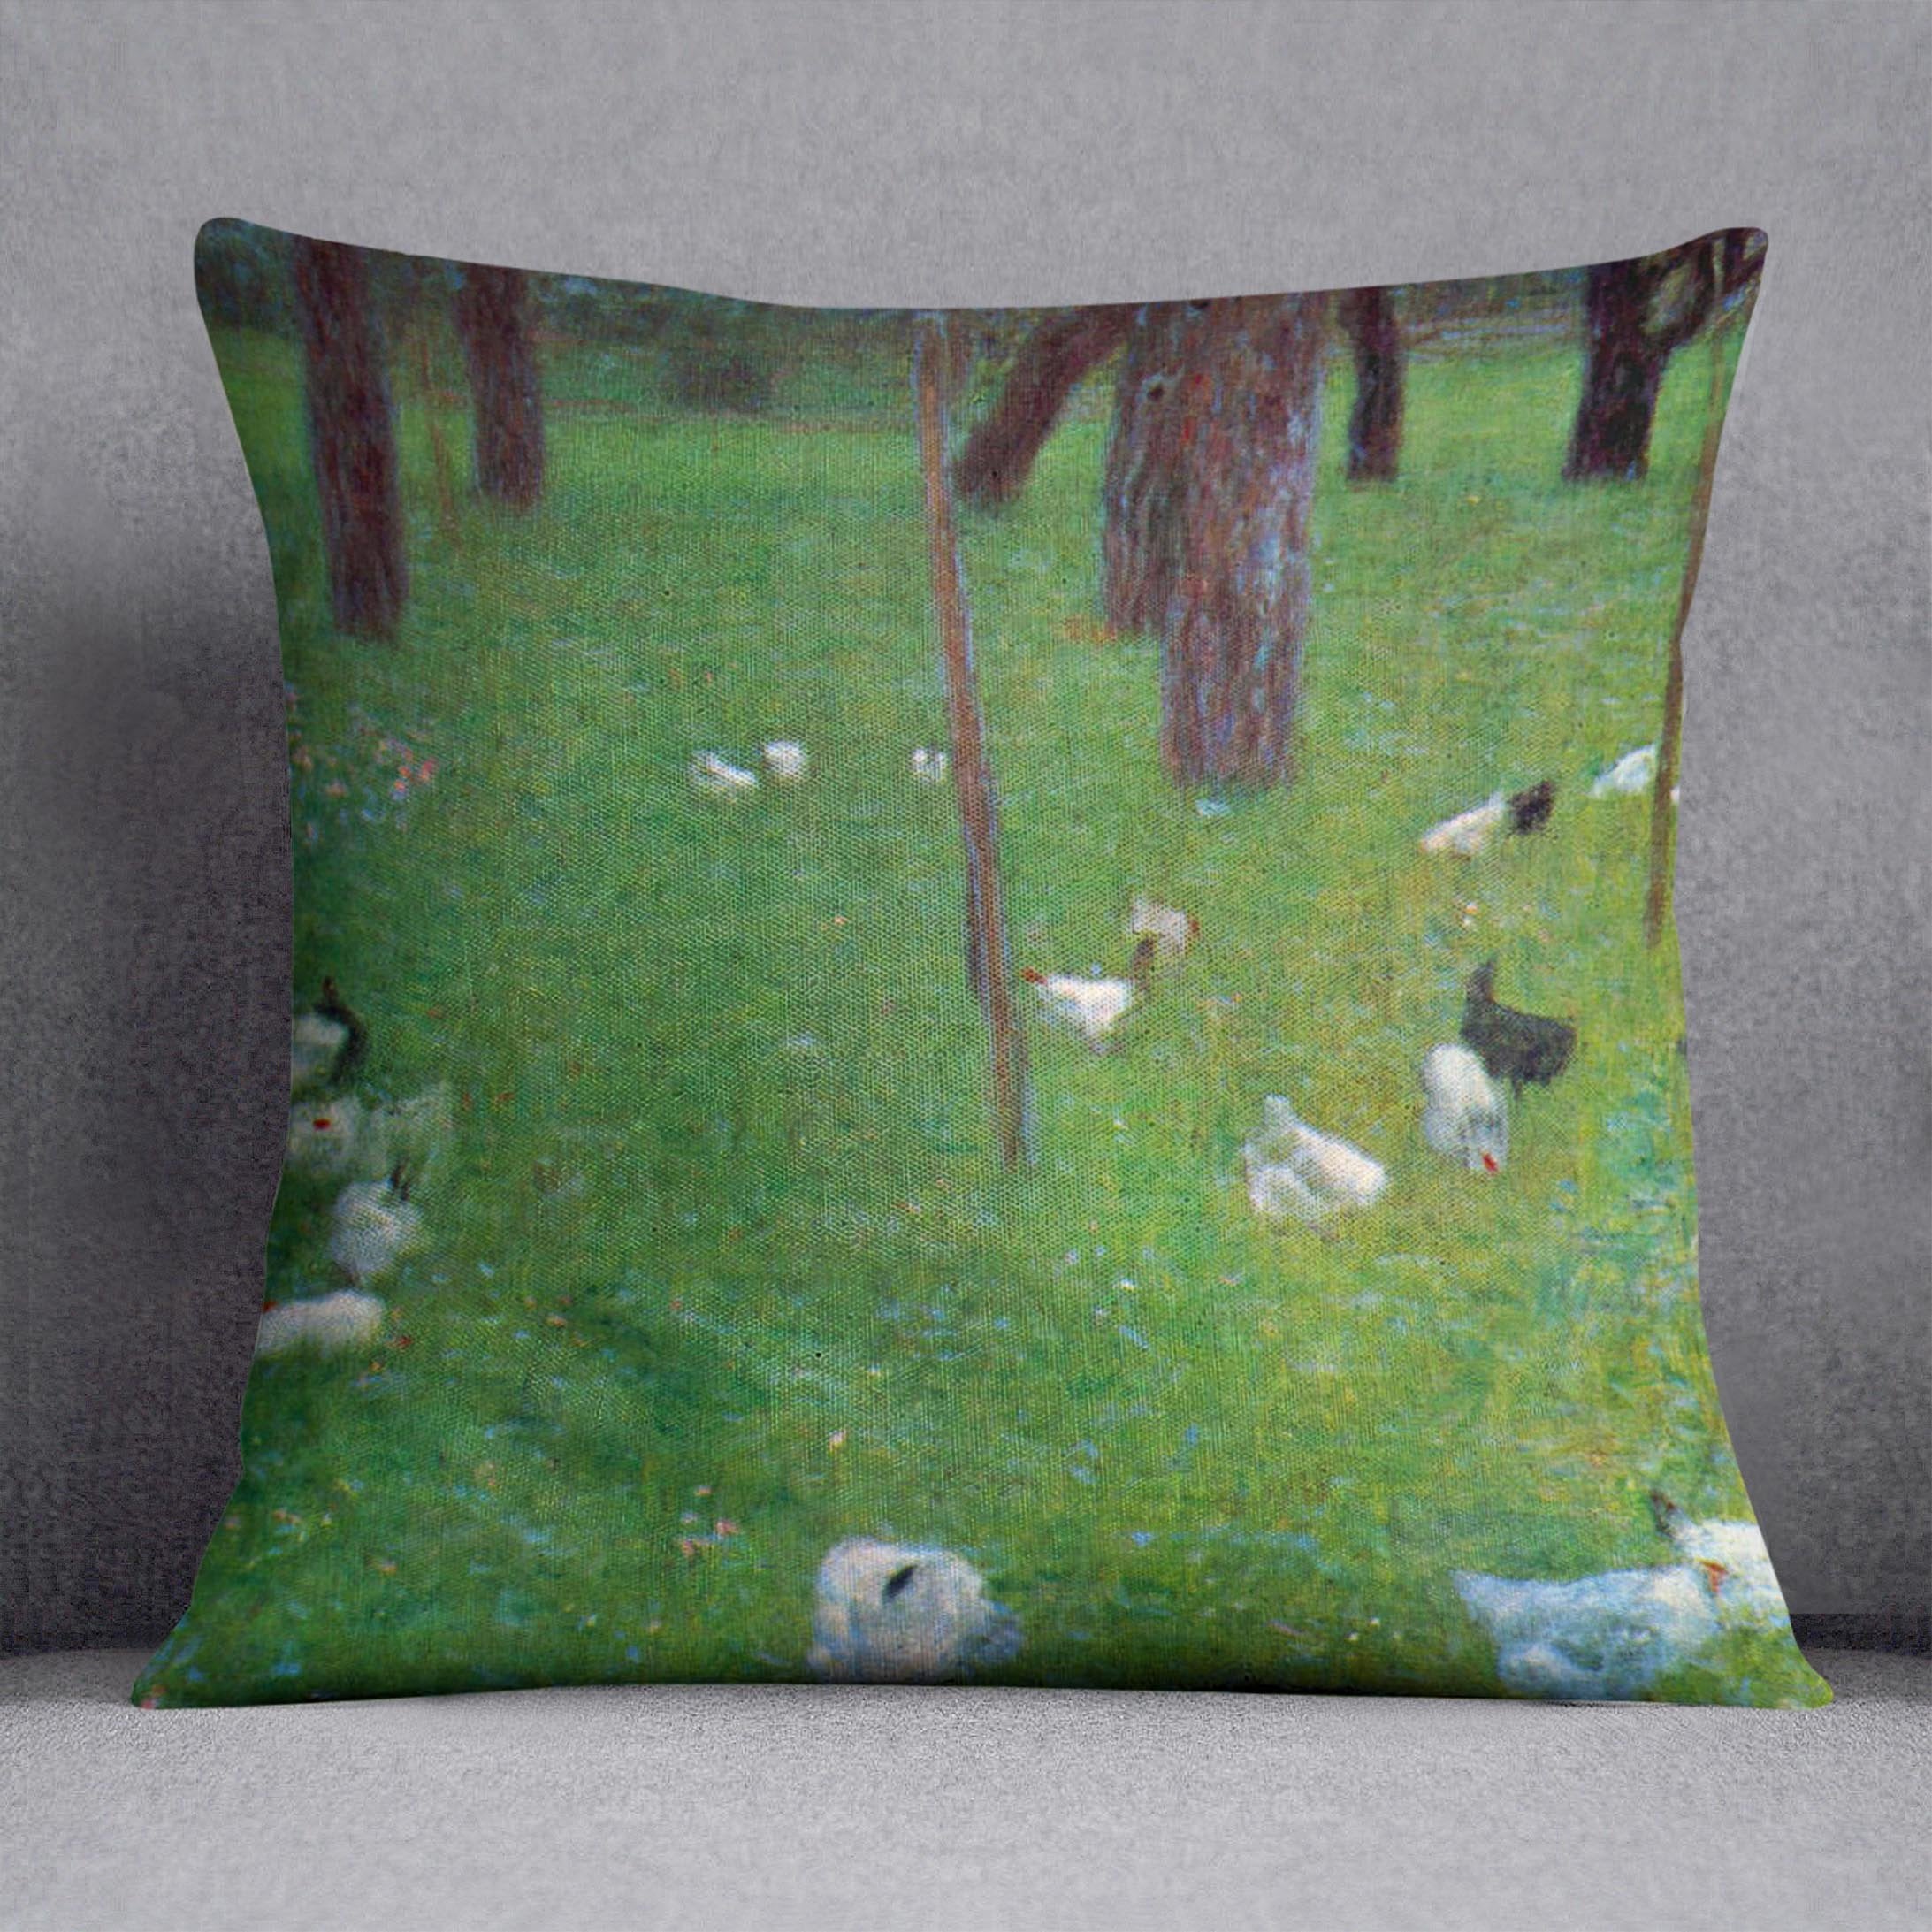 After the rain garden with chickens in St. Agatha by Klimt Throw Pillow